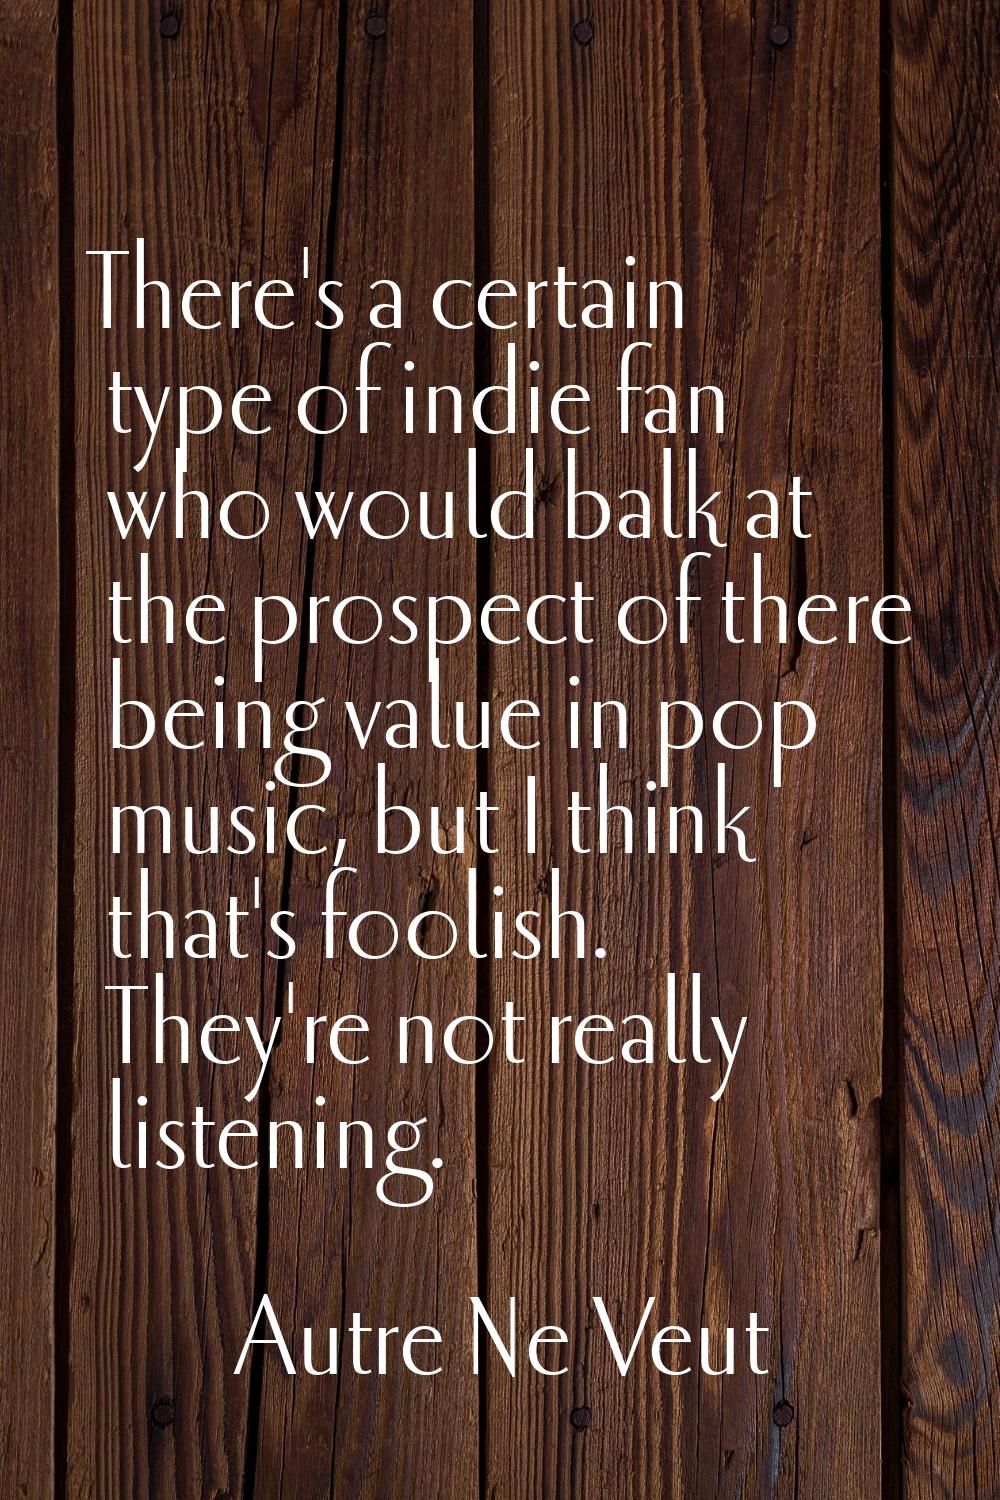 There's a certain type of indie fan who would balk at the prospect of there being value in pop musi